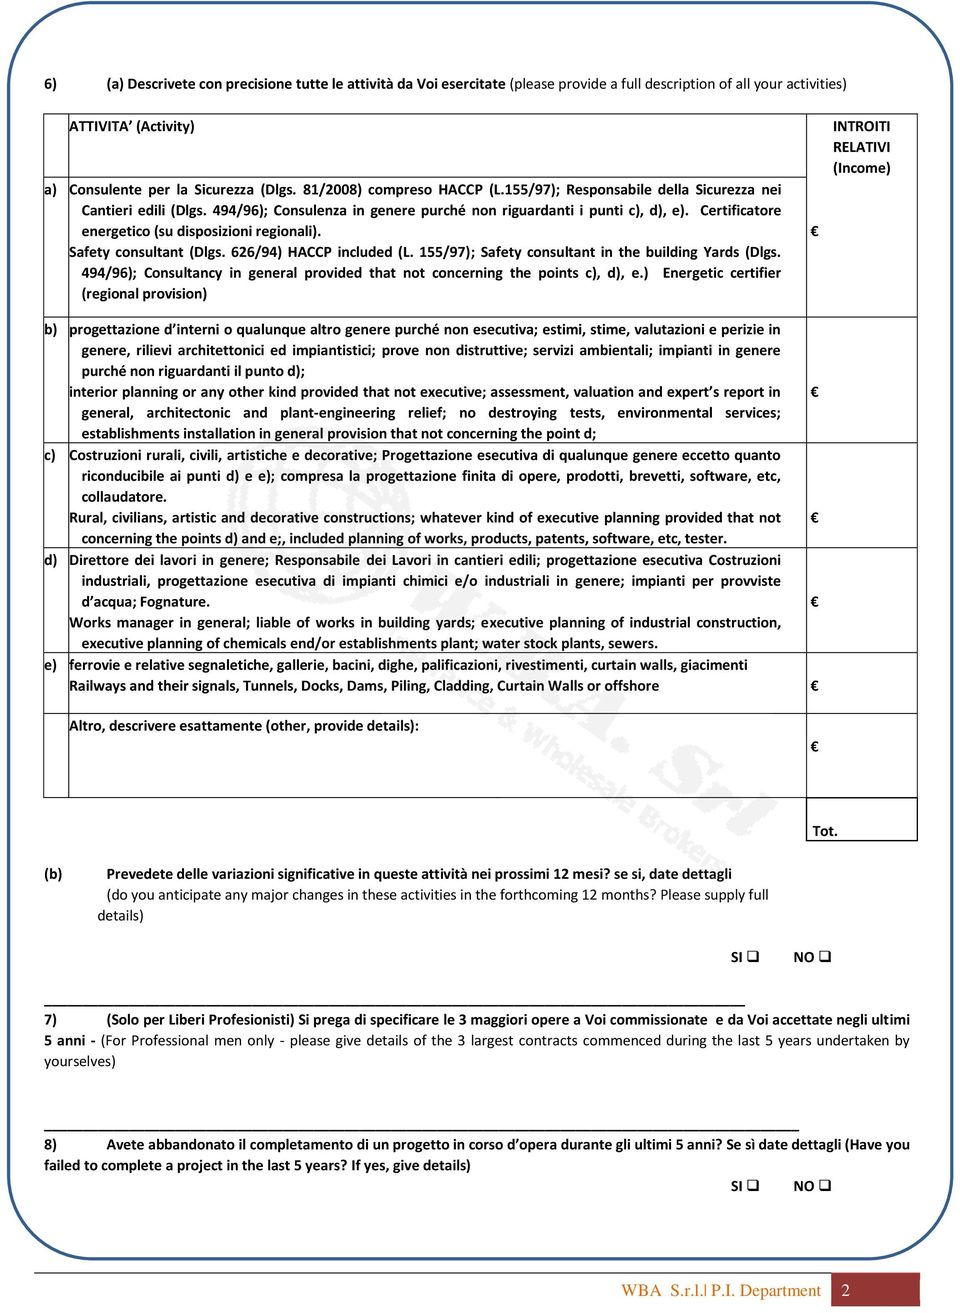 Certificatore energetico (su disposizioni regionali). Safety consultant (Dlgs. 626/94) HACCP included (L. 155/97); Safety consultant in the building Yards (Dlgs.